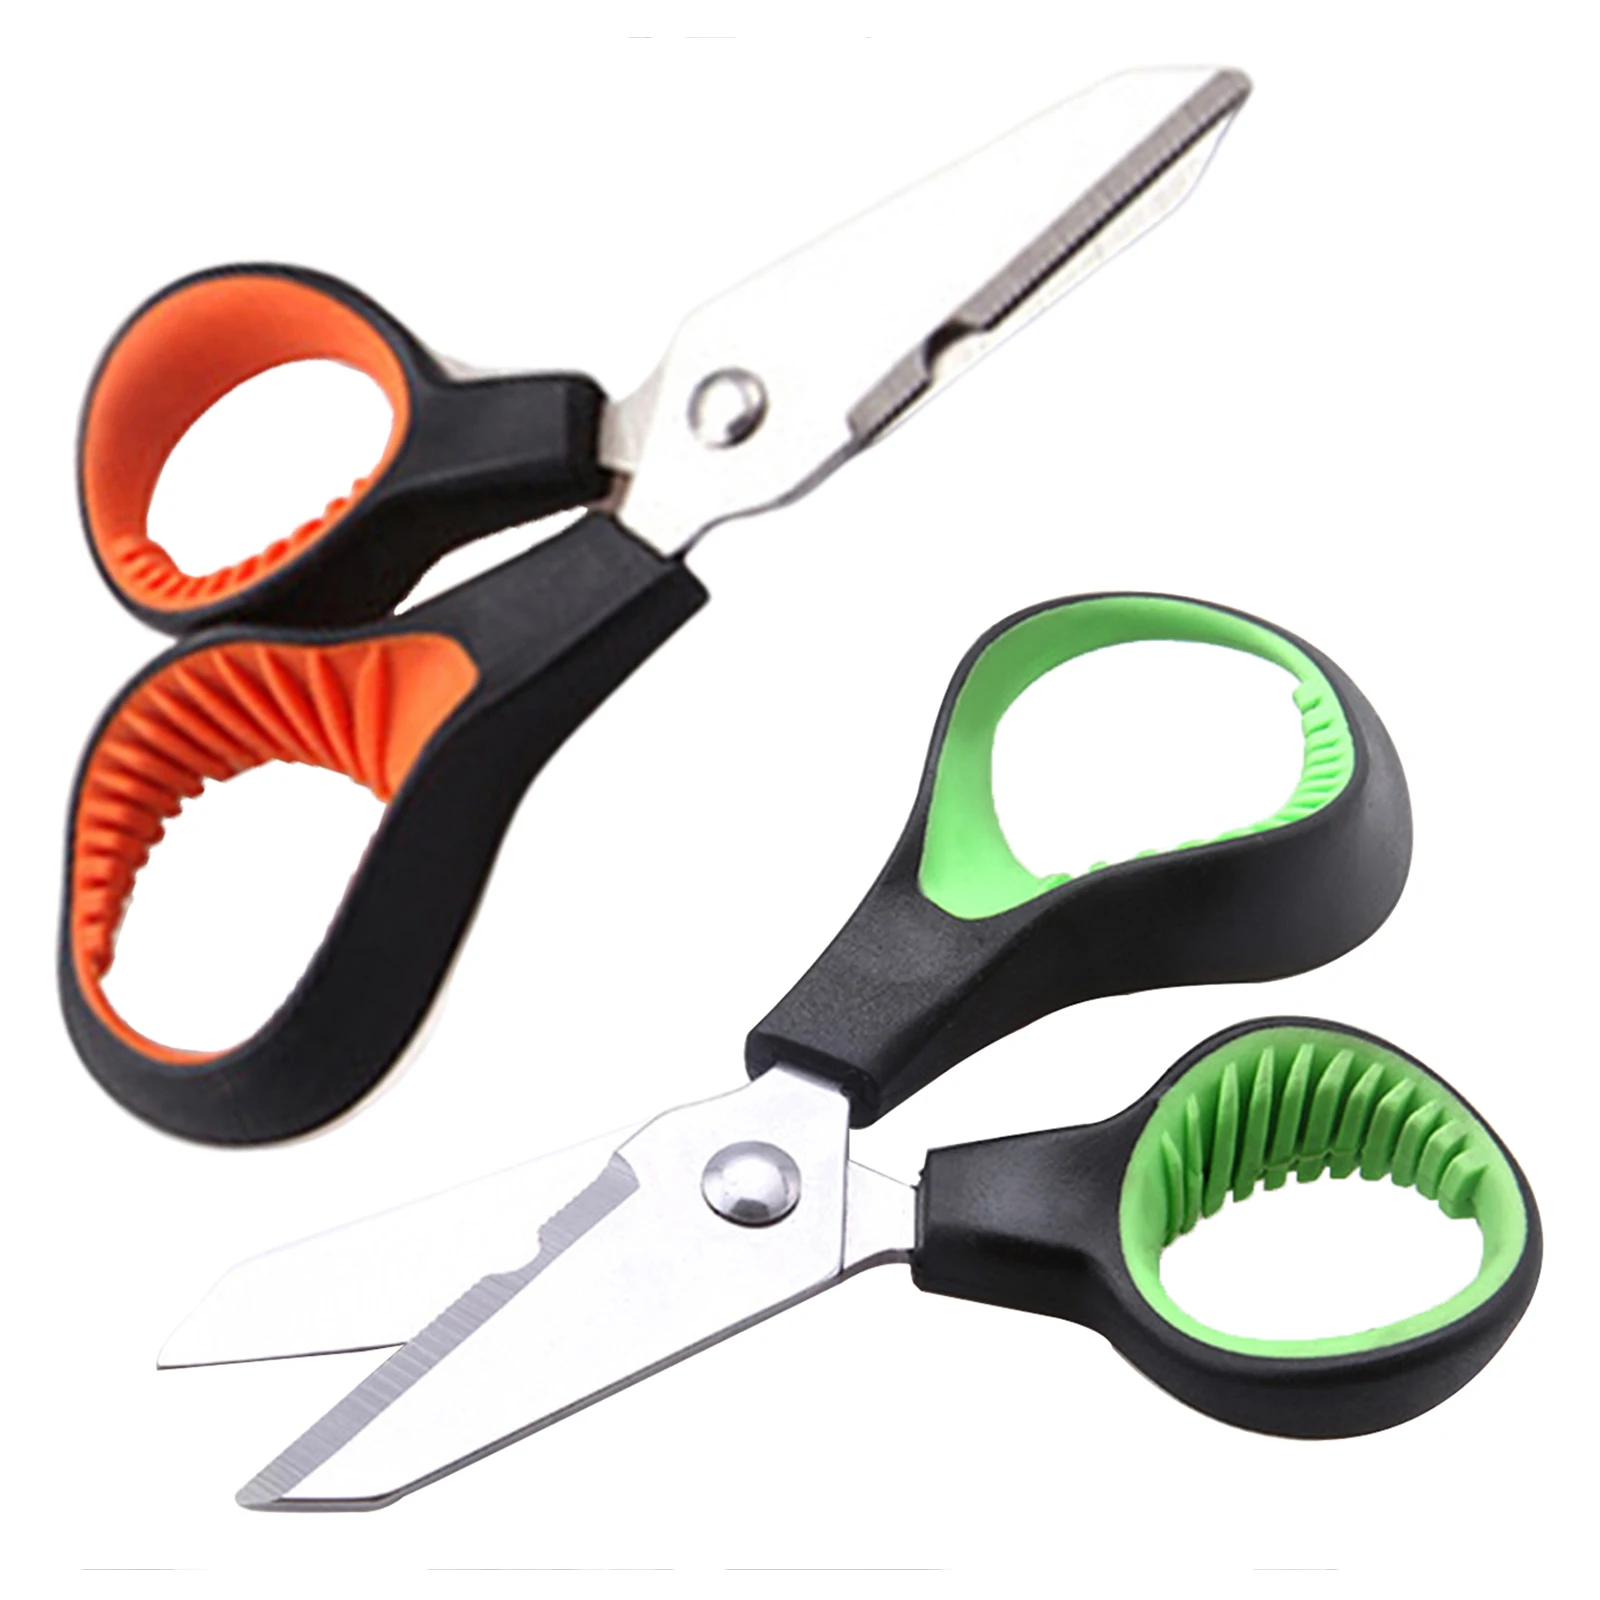 Portable Fishing Scissor for Fishing Line Lure Cutter Hook Remover Stainless Steel Pliers Fishing Scissor Pliers Accessoris